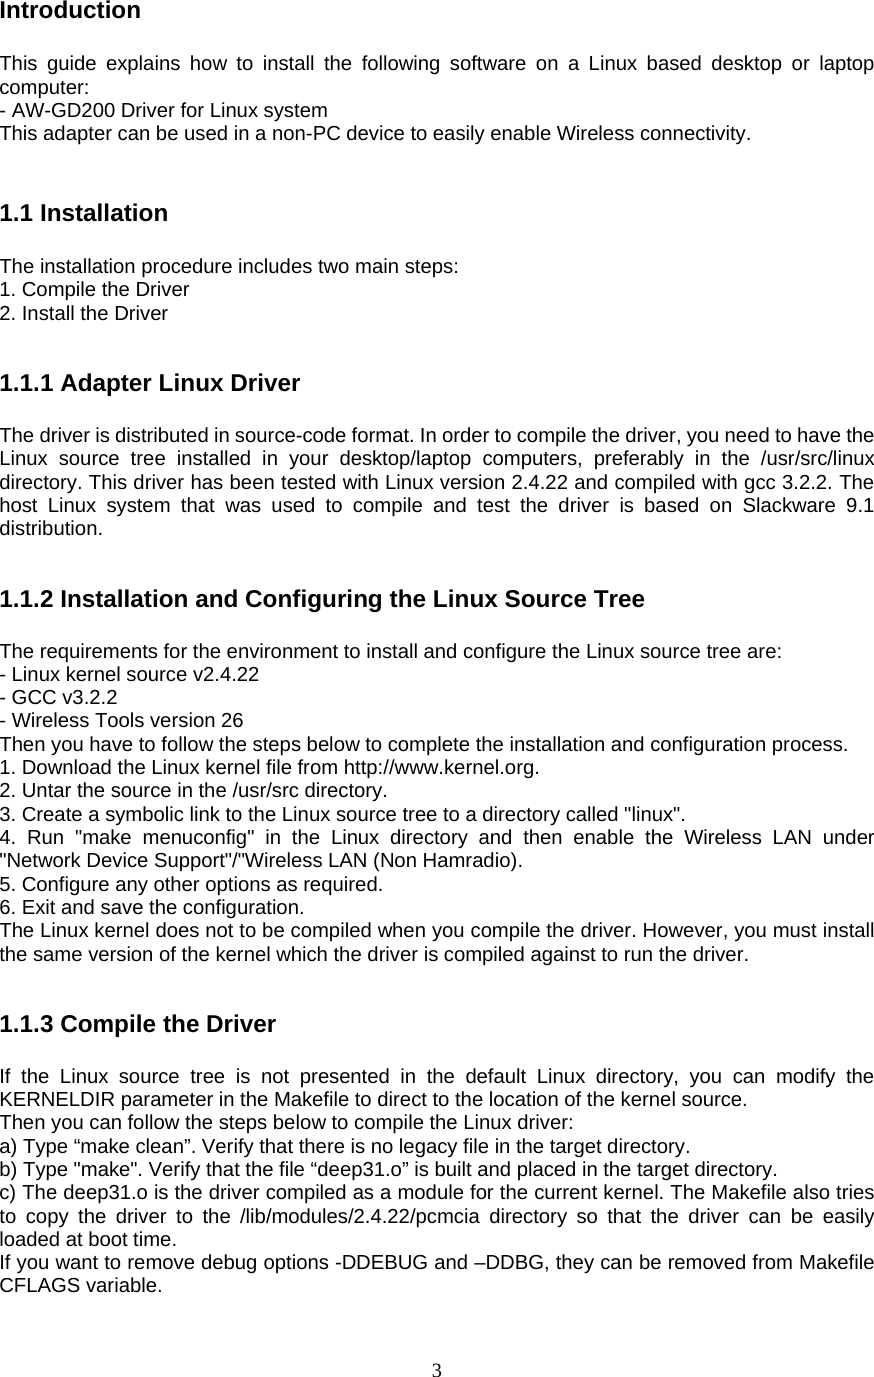  3Introduction  This guide explains how to install the following software on a Linux based desktop or laptop computer: - AW-GD200 Driver for Linux system This adapter can be used in a non-PC device to easily enable Wireless connectivity.   1.1 Installation  The installation procedure includes two main steps: 1. Compile the Driver 2. Install the Driver   1.1.1 Adapter Linux Driver  The driver is distributed in source-code format. In order to compile the driver, you need to have the Linux source tree installed in your desktop/laptop computers, preferably in the /usr/src/linux directory. This driver has been tested with Linux version 2.4.22 and compiled with gcc 3.2.2. The host Linux system that was used to compile and test the driver is based on Slackware 9.1 distribution.   1.1.2 Installation and Configuring the Linux Source Tree  The requirements for the environment to install and configure the Linux source tree are: - Linux kernel source v2.4.22 - GCC v3.2.2 - Wireless Tools version 26 Then you have to follow the steps below to complete the installation and configuration process. 1. Download the Linux kernel file from http://www.kernel.org. 2. Untar the source in the /usr/src directory. 3. Create a symbolic link to the Linux source tree to a directory called &quot;linux&quot;. 4. Run &quot;make menuconfig&quot; in the Linux directory and then enable the Wireless LAN under &quot;Network Device Support&quot;/&quot;Wireless LAN (Non Hamradio). 5. Configure any other options as required. 6. Exit and save the configuration. The Linux kernel does not to be compiled when you compile the driver. However, you must install the same version of the kernel which the driver is compiled against to run the driver.   1.1.3 Compile the Driver  If the Linux source tree is not presented in the default Linux directory, you can modify the KERNELDIR parameter in the Makefile to direct to the location of the kernel source. Then you can follow the steps below to compile the Linux driver: a) Type “make clean”. Verify that there is no legacy file in the target directory. b) Type &quot;make&quot;. Verify that the file “deep31.o” is built and placed in the target directory. c) The deep31.o is the driver compiled as a module for the current kernel. The Makefile also tries to copy the driver to the /lib/modules/2.4.22/pcmcia directory so that the driver can be easily loaded at boot time. If you want to remove debug options -DDEBUG and –DDBG, they can be removed from Makefile CFLAGS variable. 